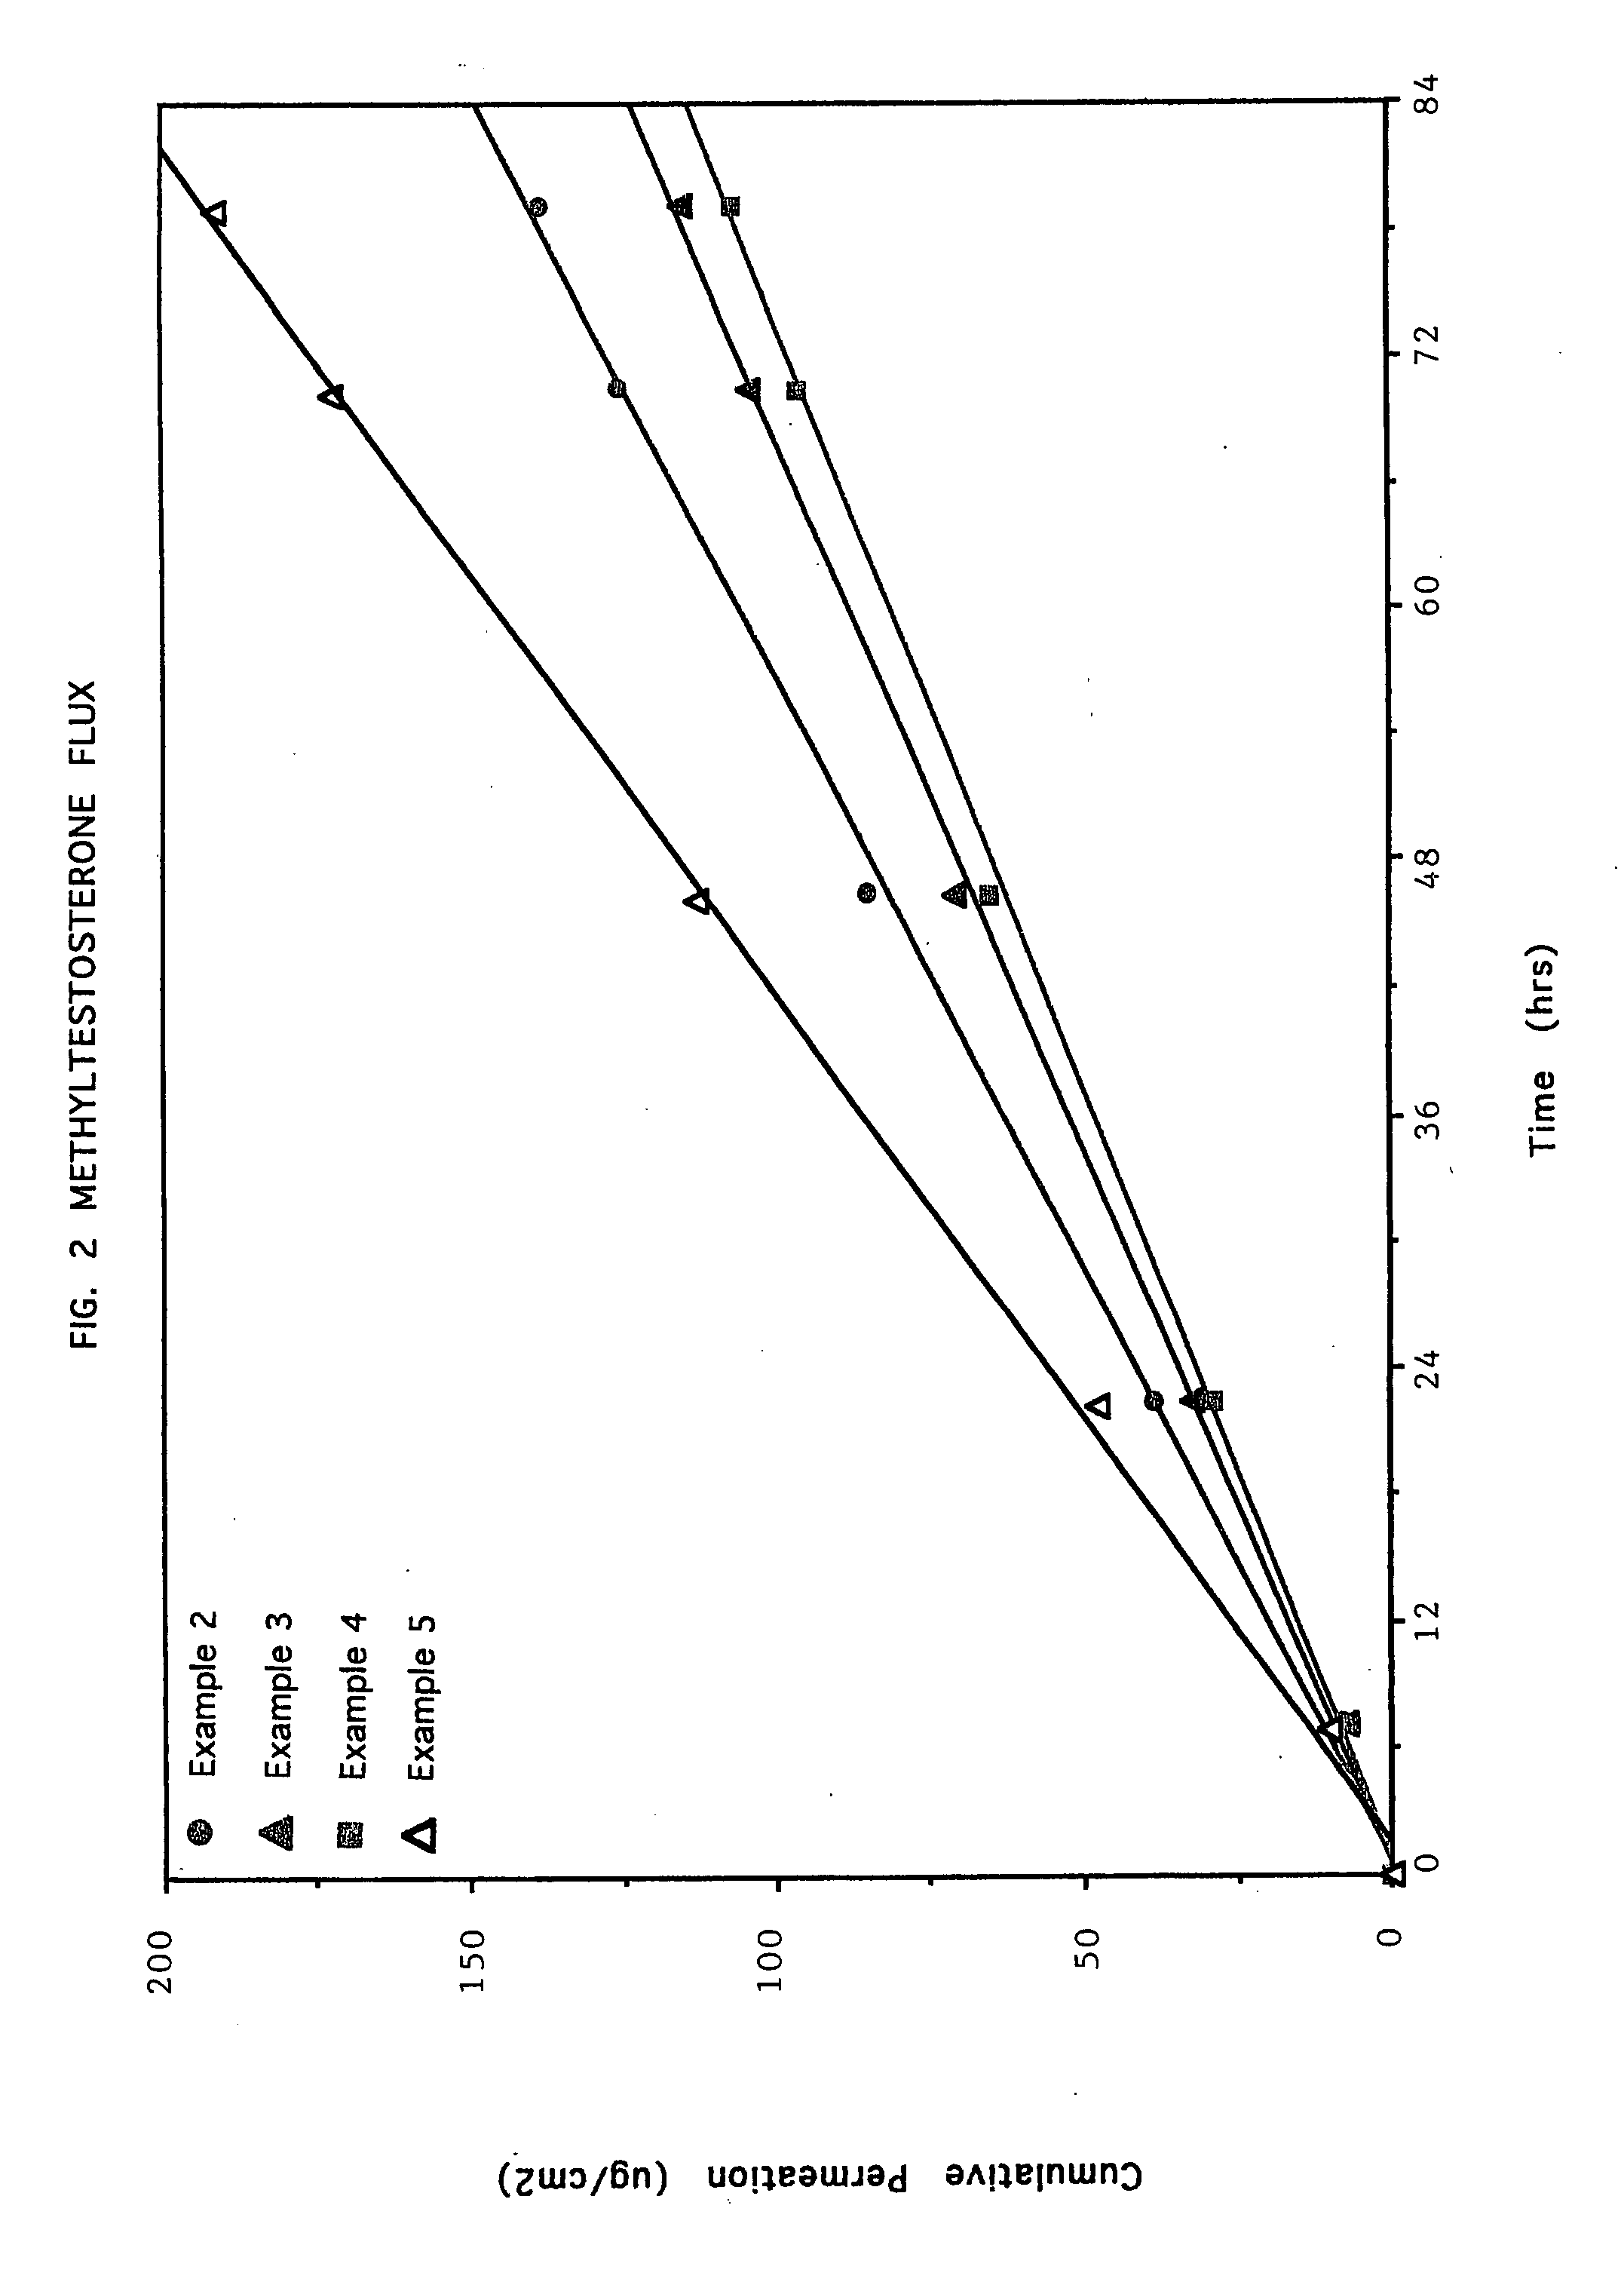 Crystallization inhibition of drugs in transdermal drug delivery systems and methods of use